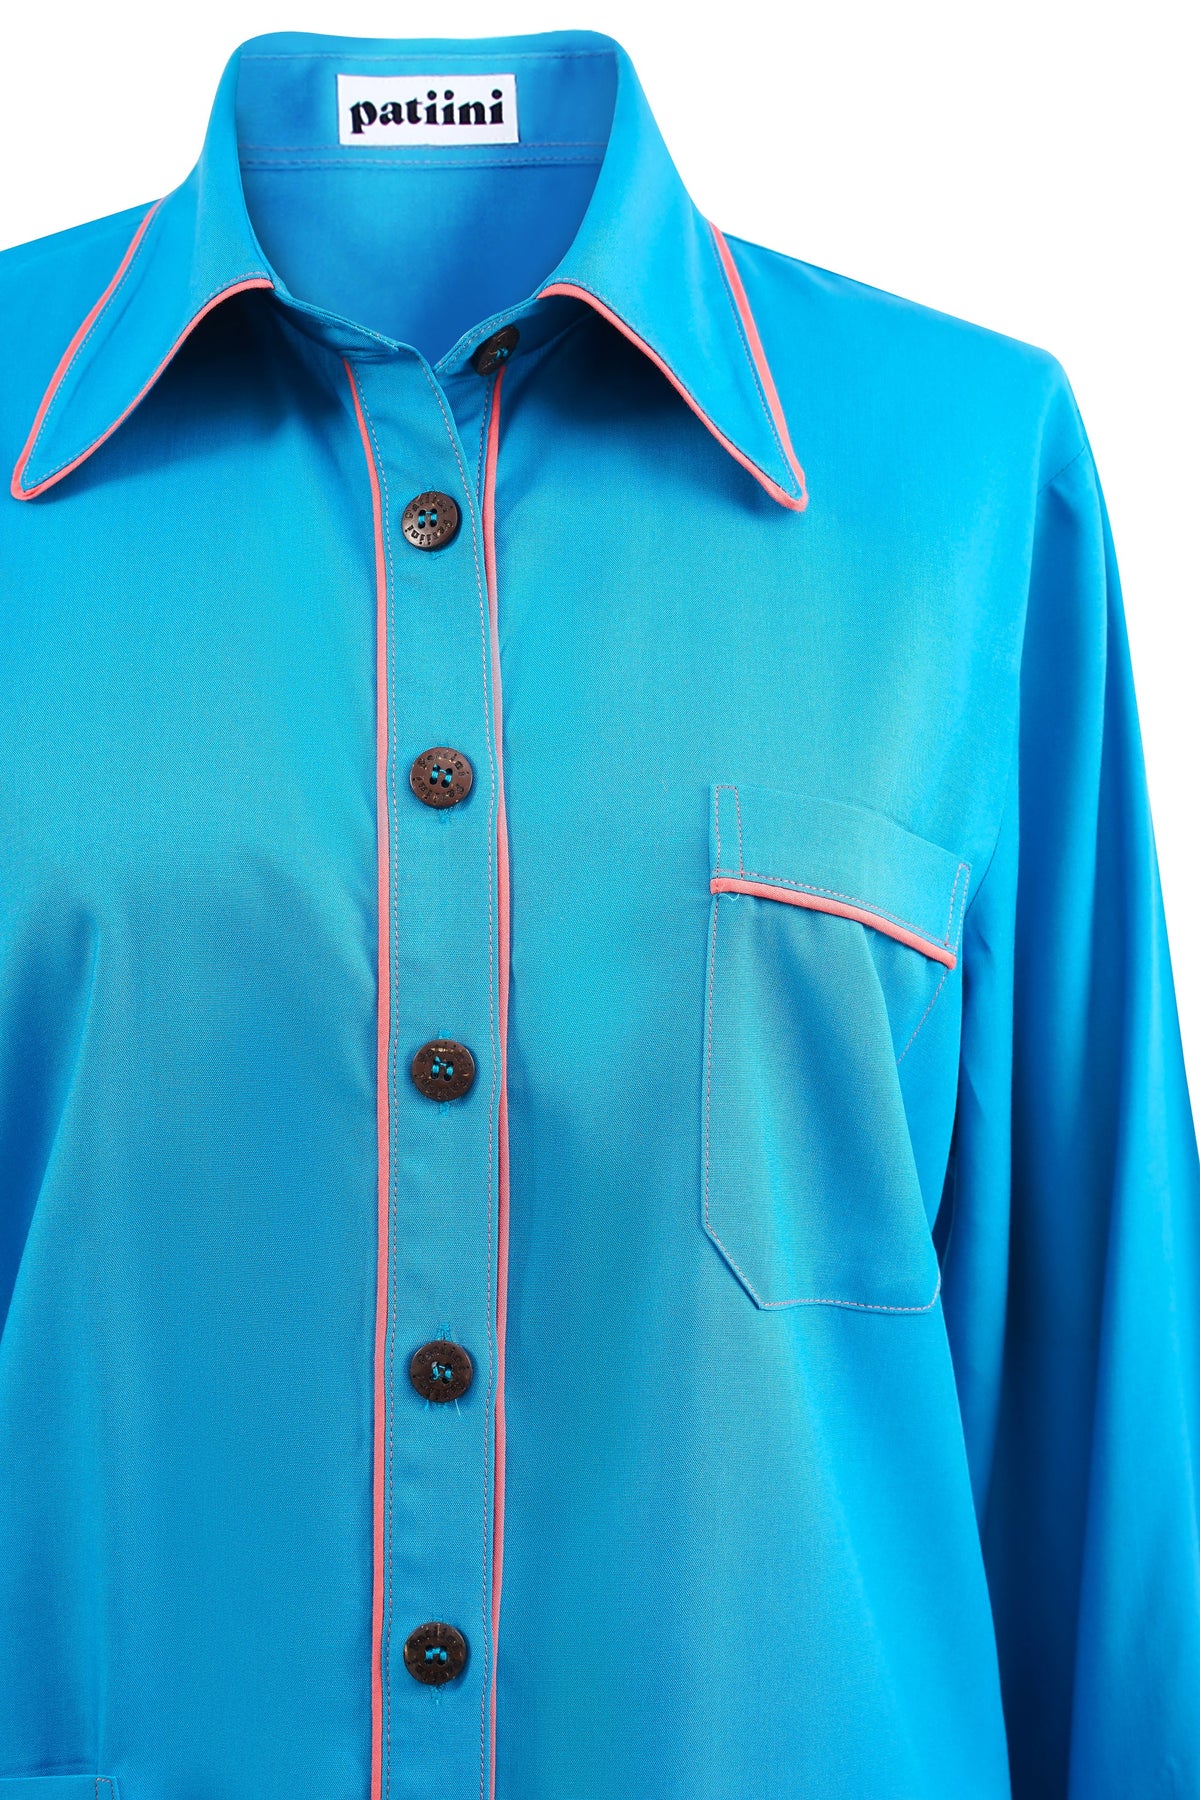 Close up of blue pajama shirt wiith coconut shell buttons and contrasting coral piping.